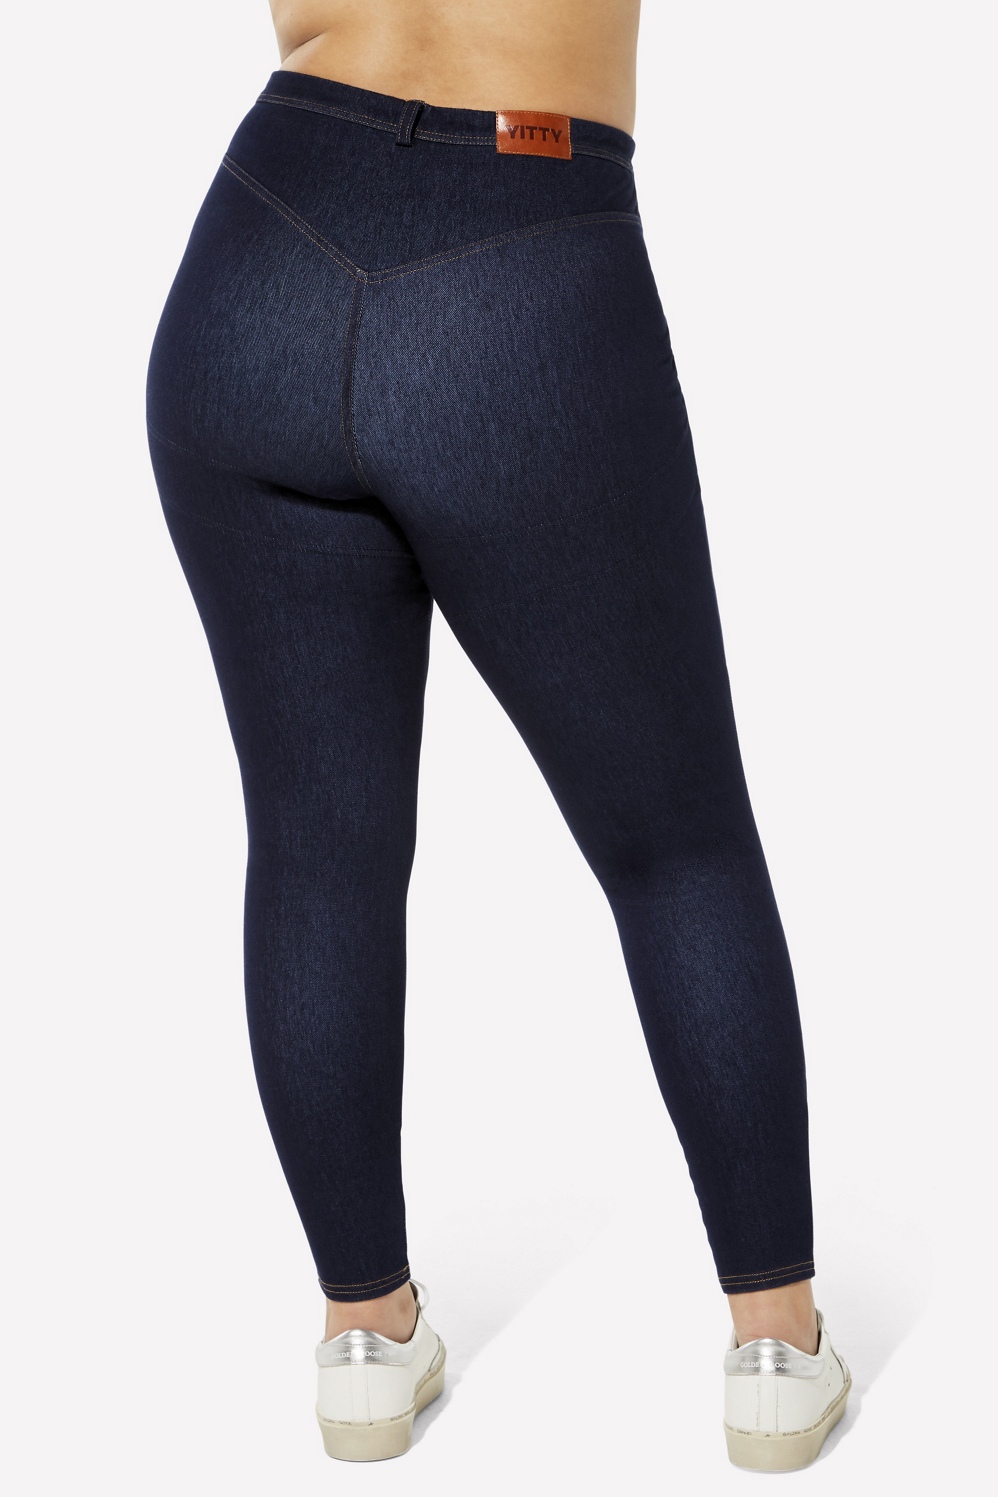 Denim Served - Yitty Jean Stretch Smoothing Is